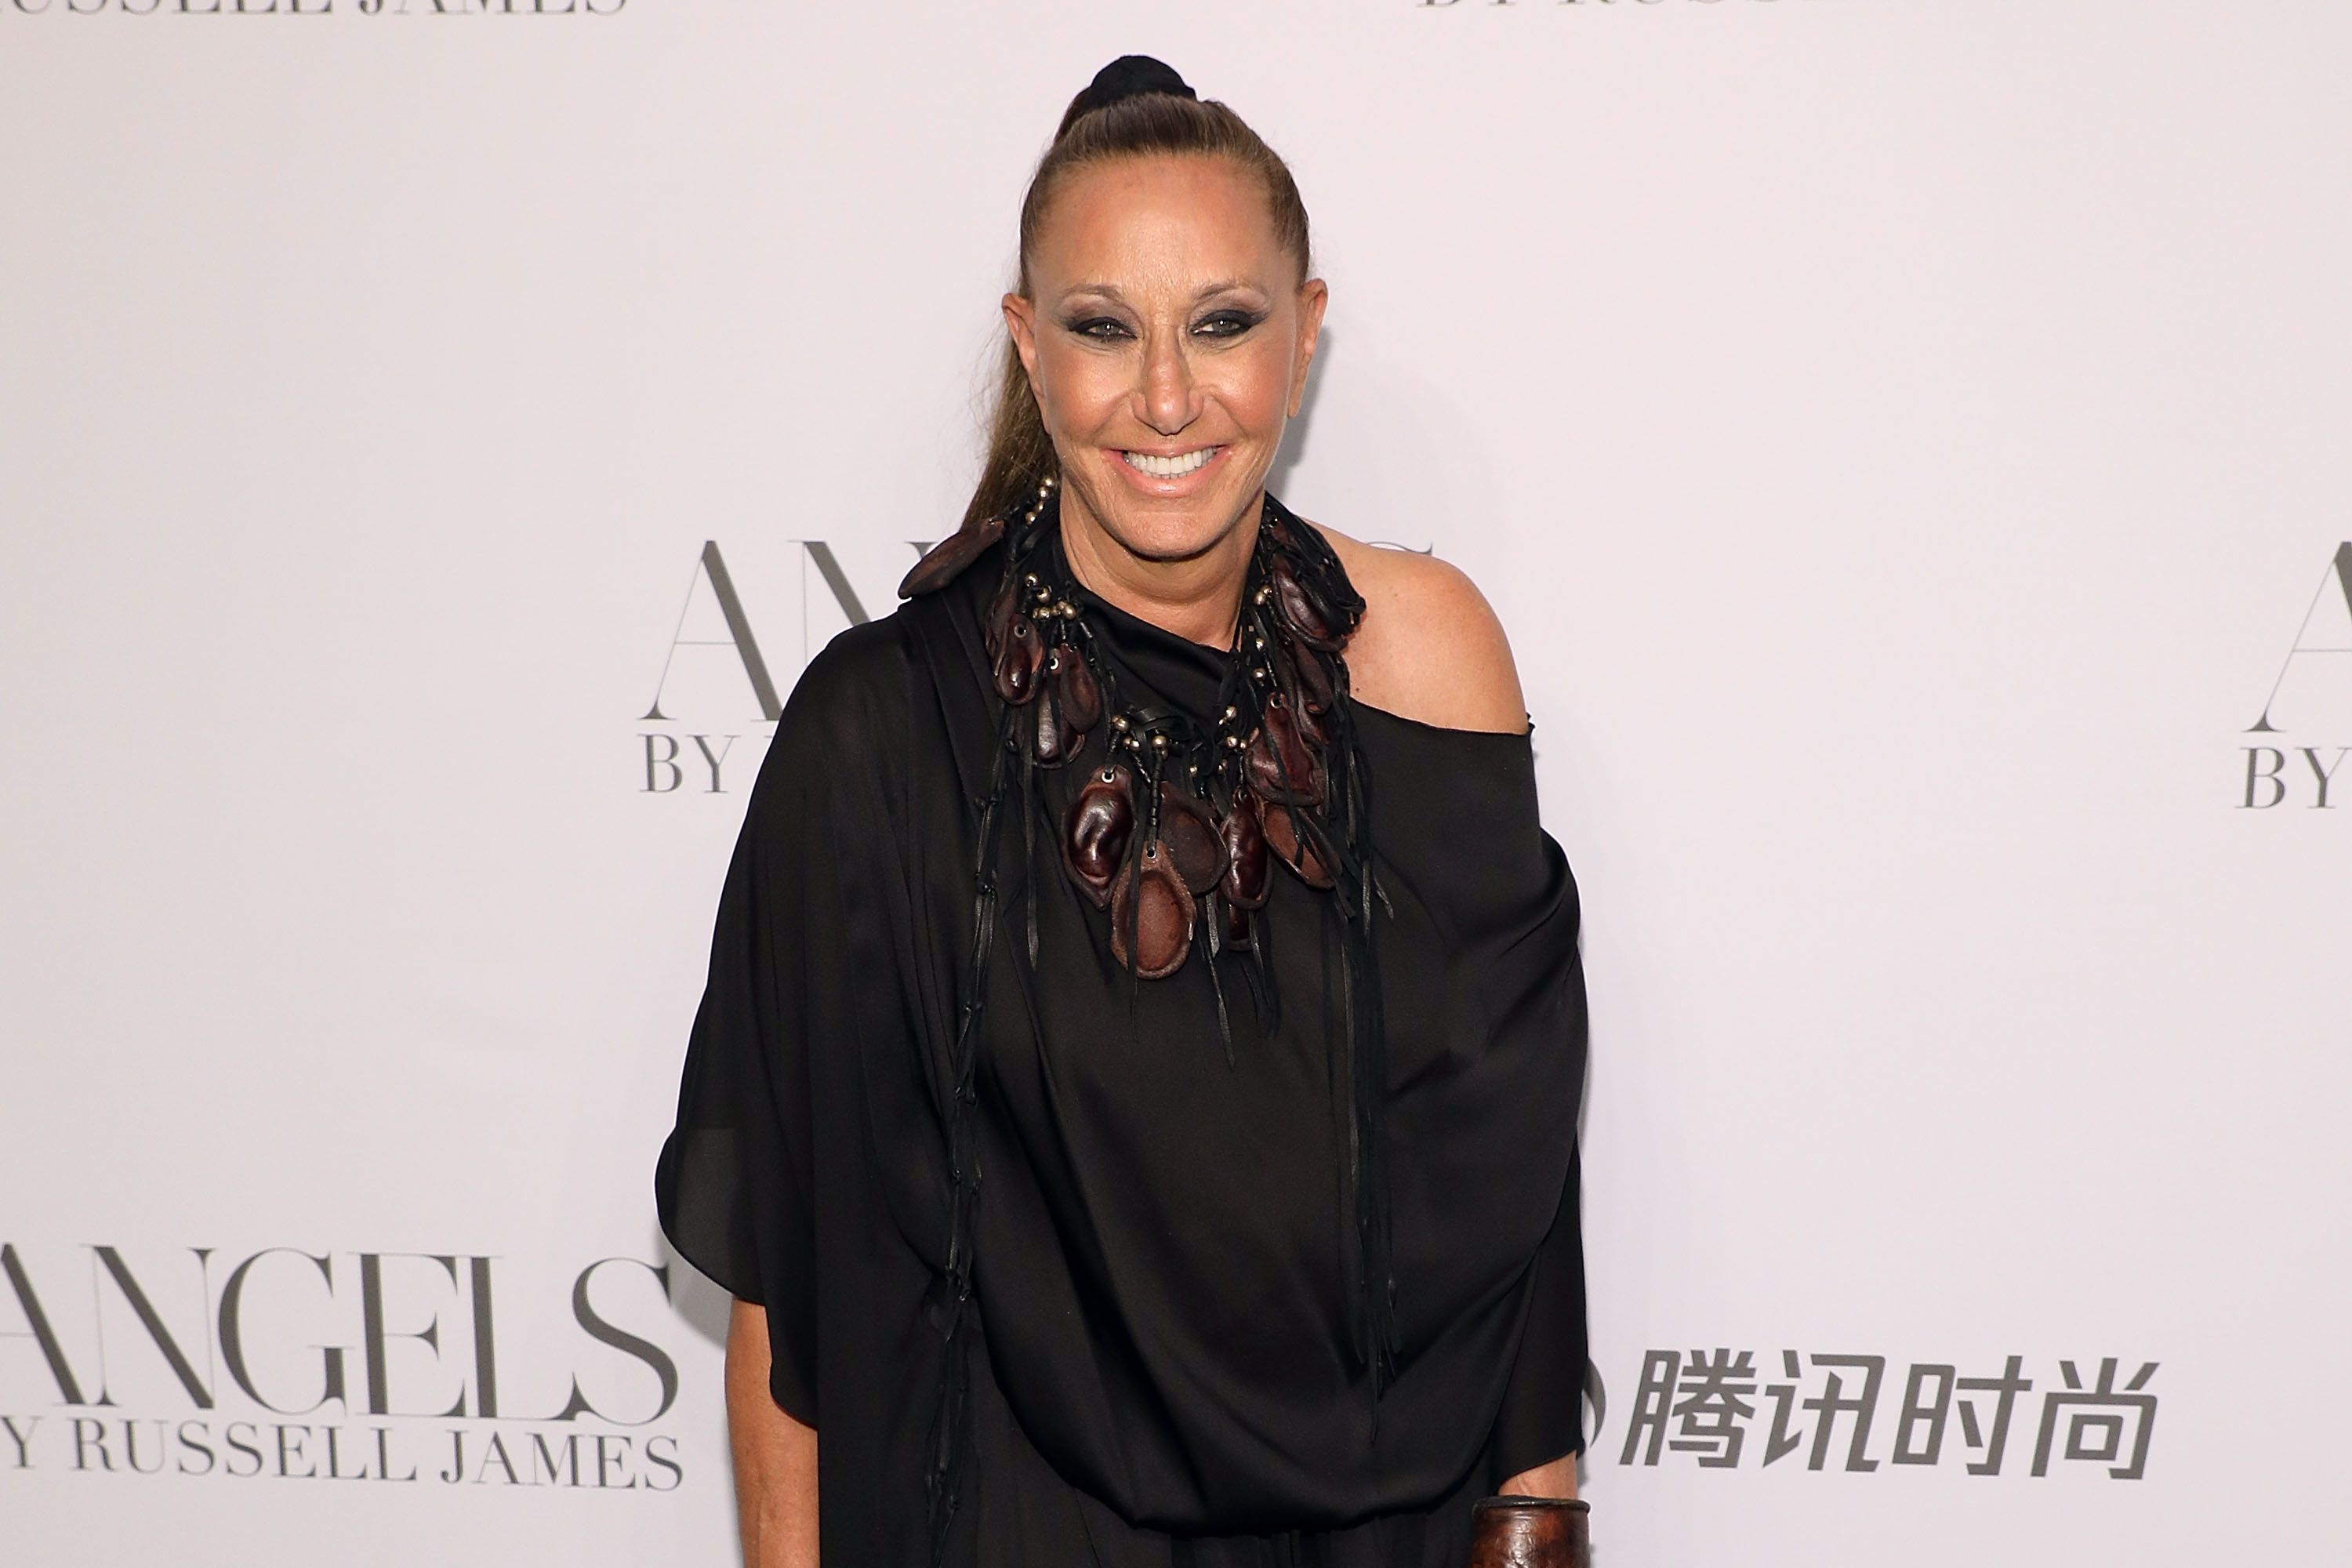 Donna Karan seems her own muse _ and customer